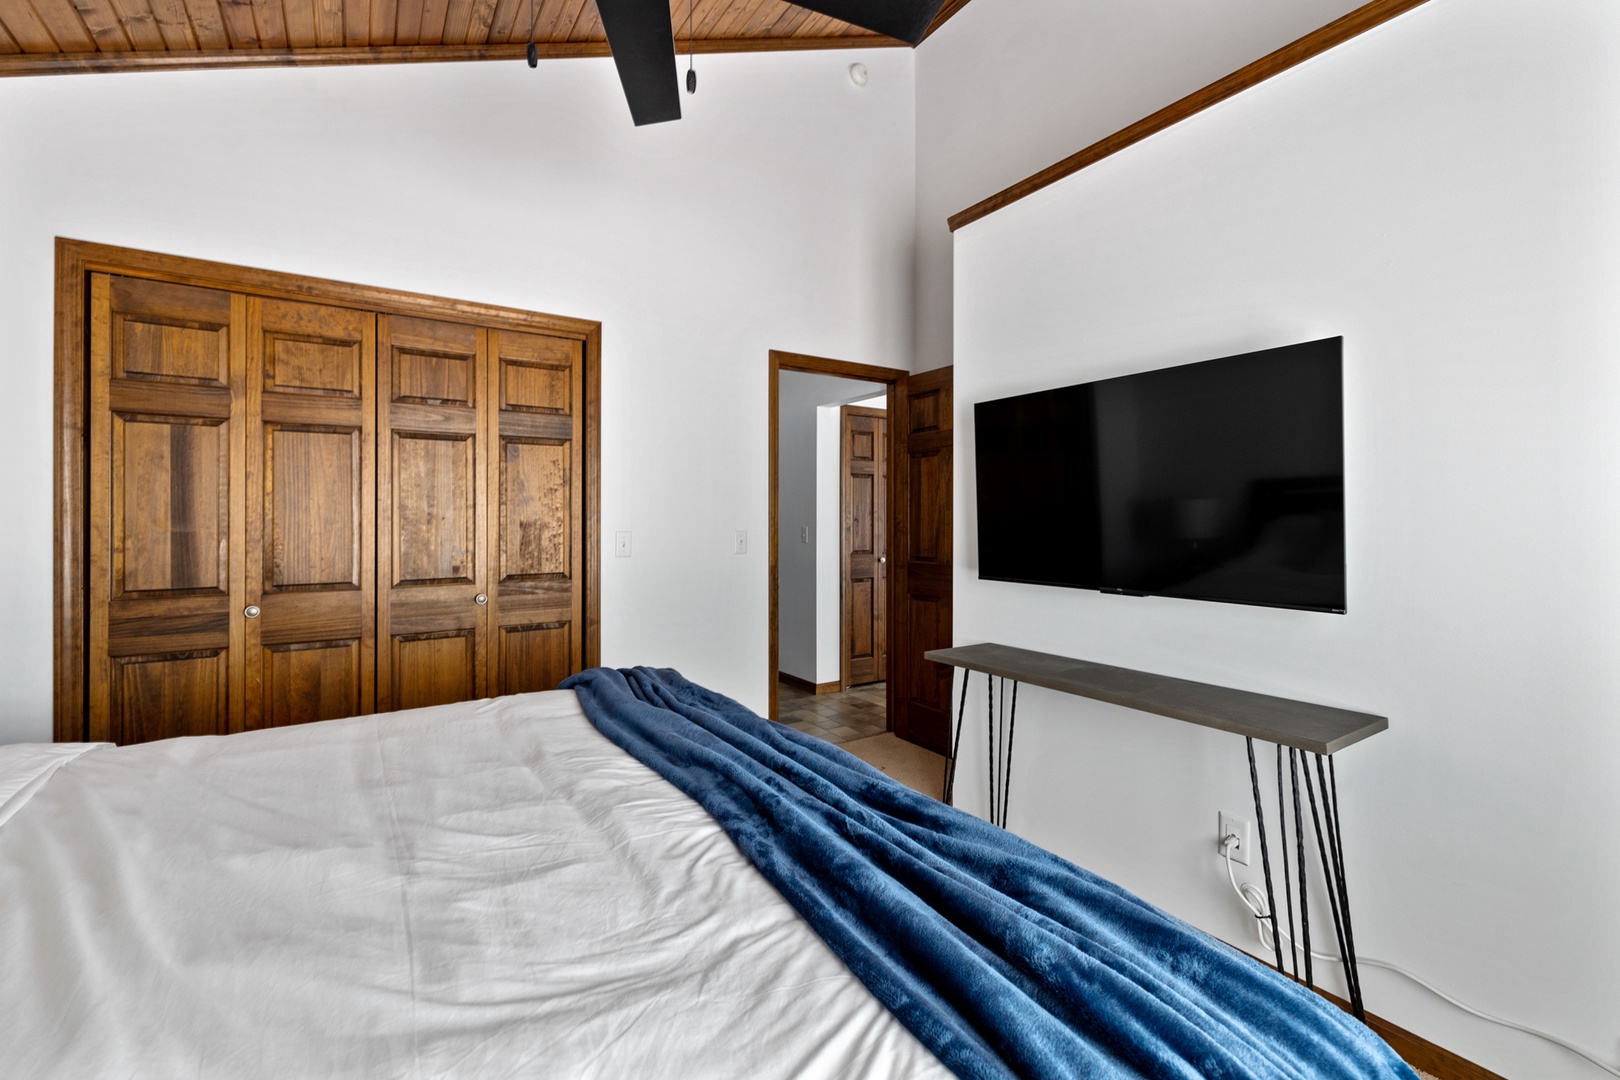 Each bedroom features a smart TV - no arguing over what to watch!